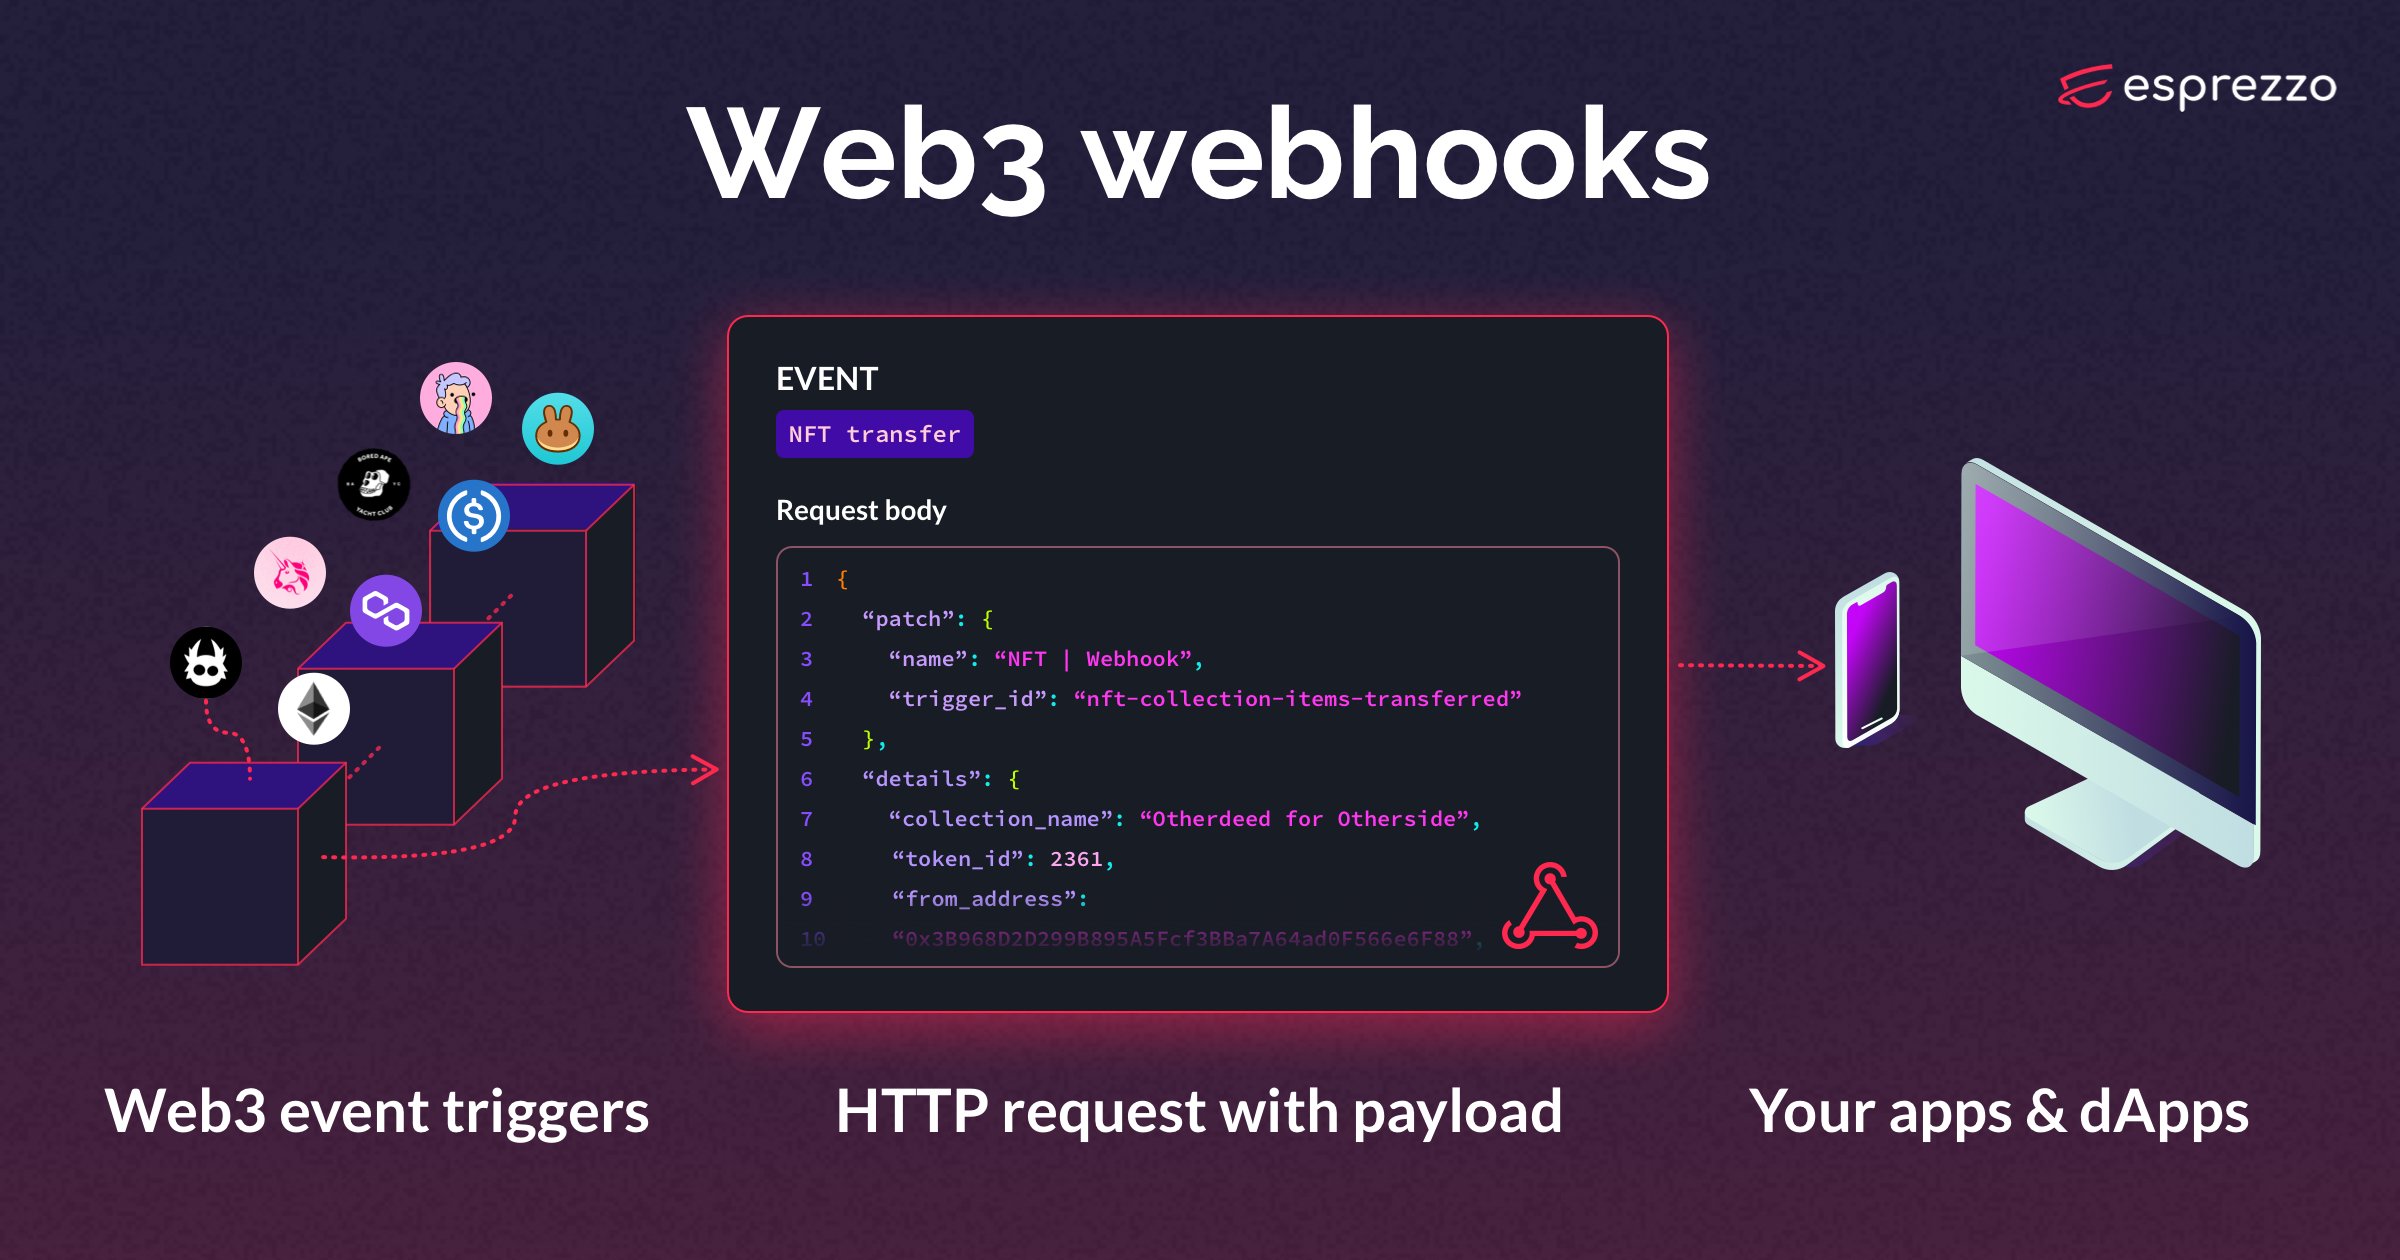 web3 webhook flow with web3 event triggers for nft transfers, wallet balance changes, sample HTTP request with JSON payload